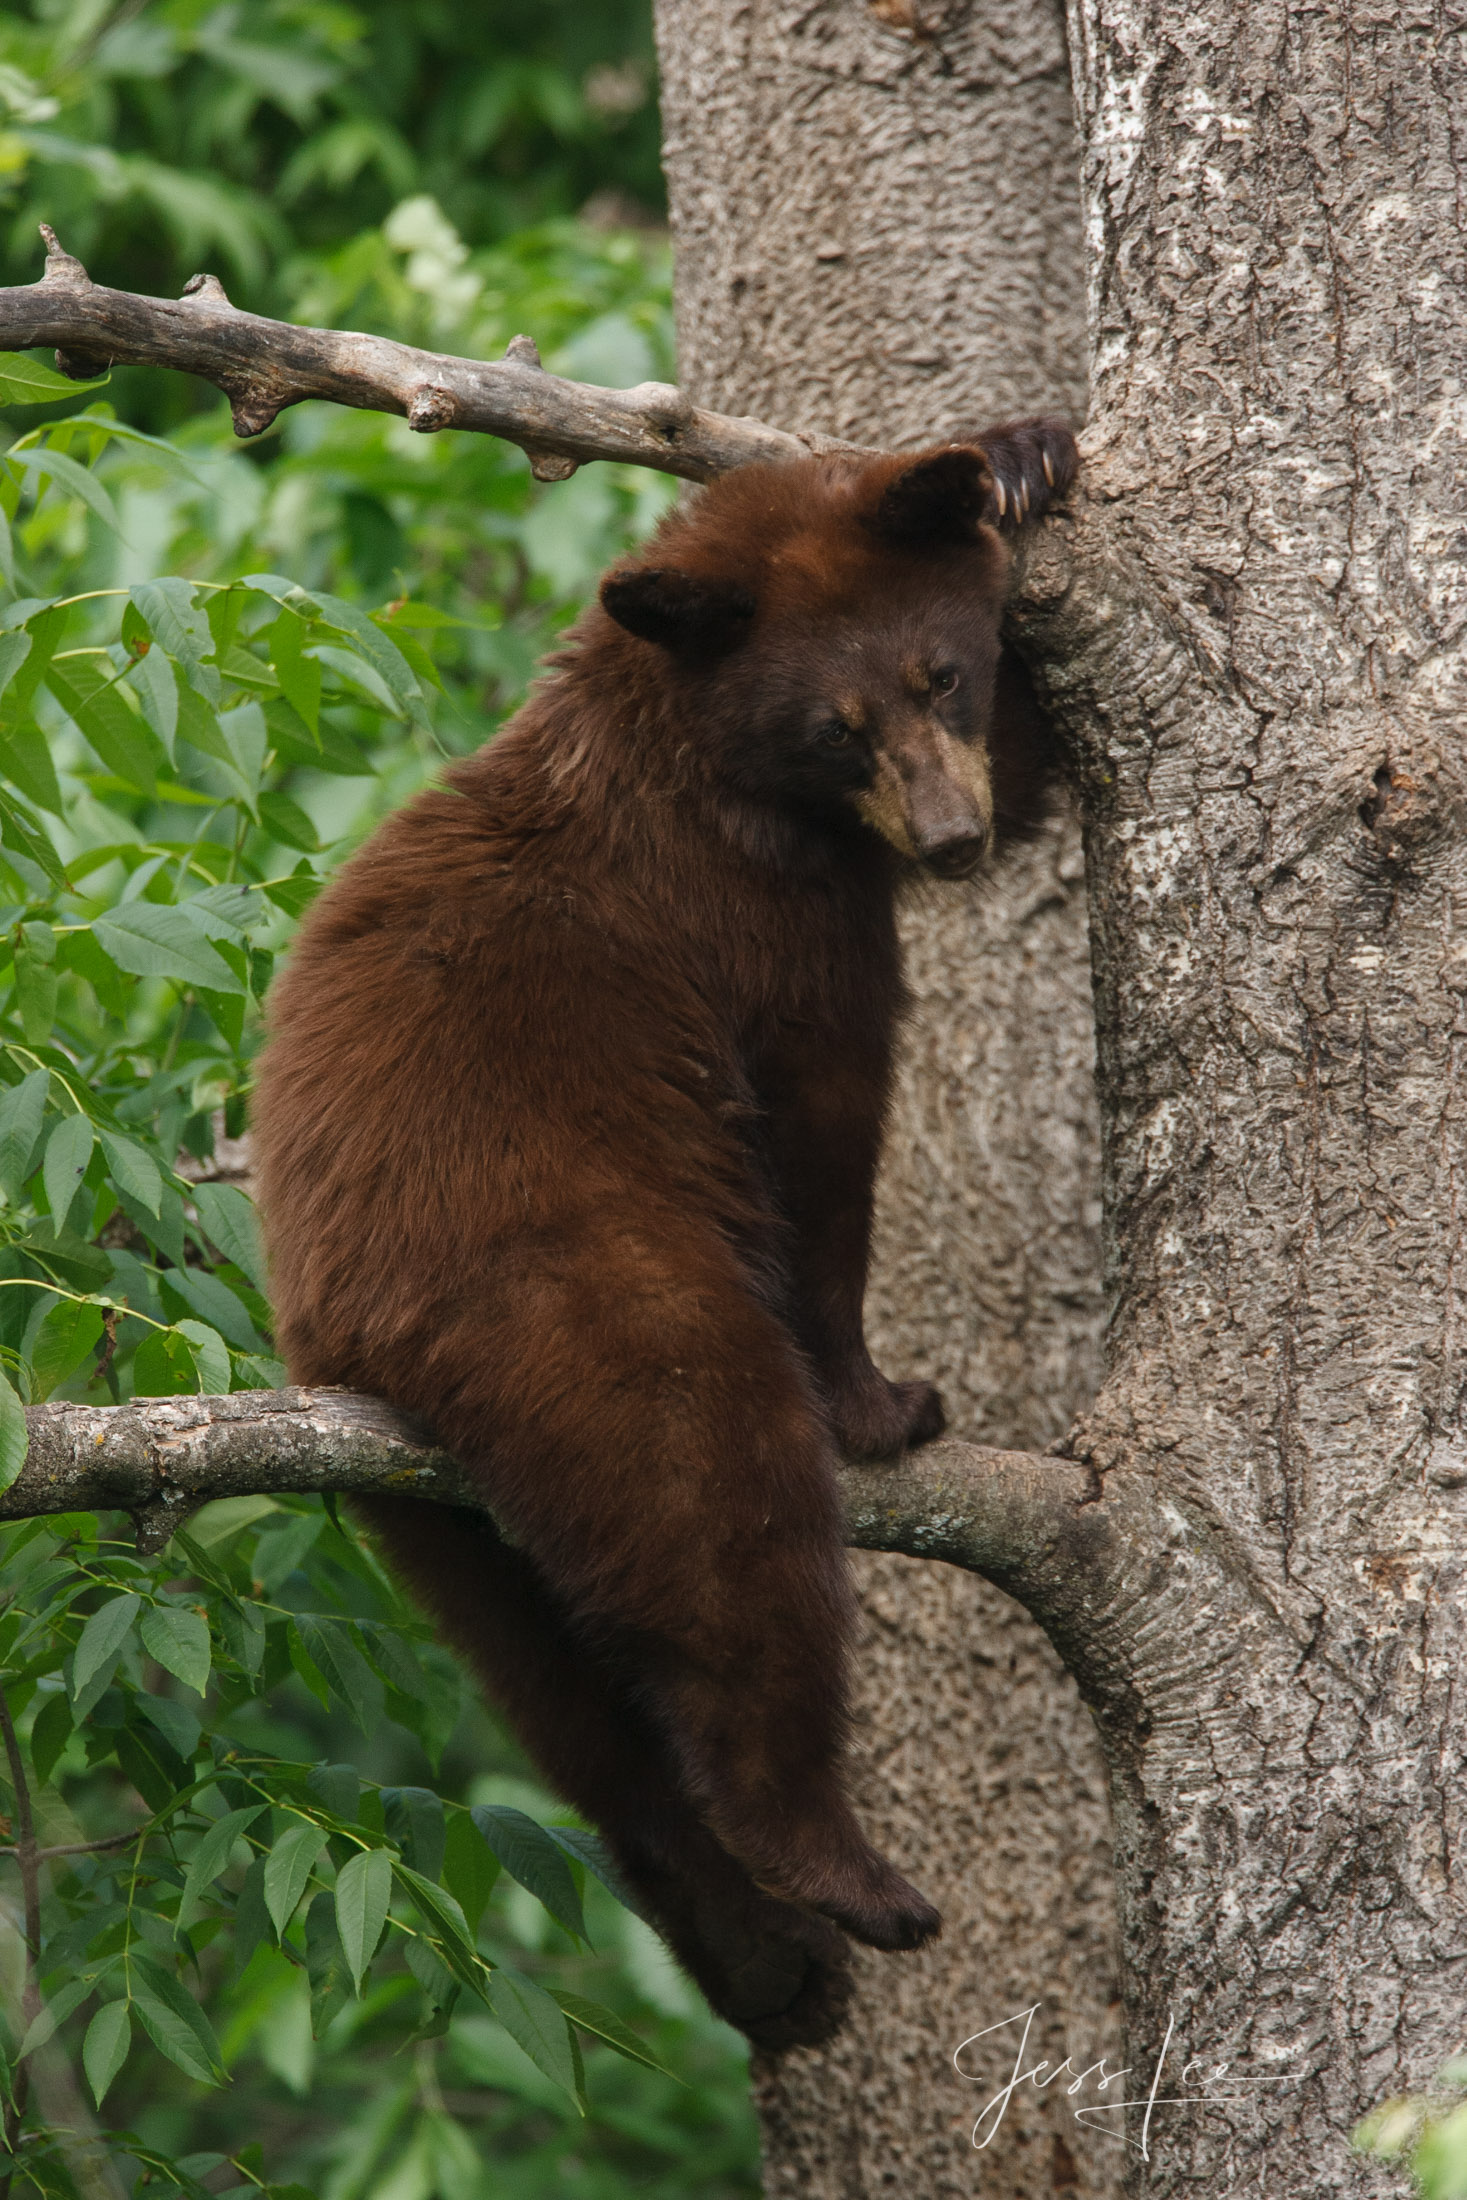 Black Bear in a Tree Photo, Limited Edition Print.  These bear photographs are offered as high-quality prints for sale as created...